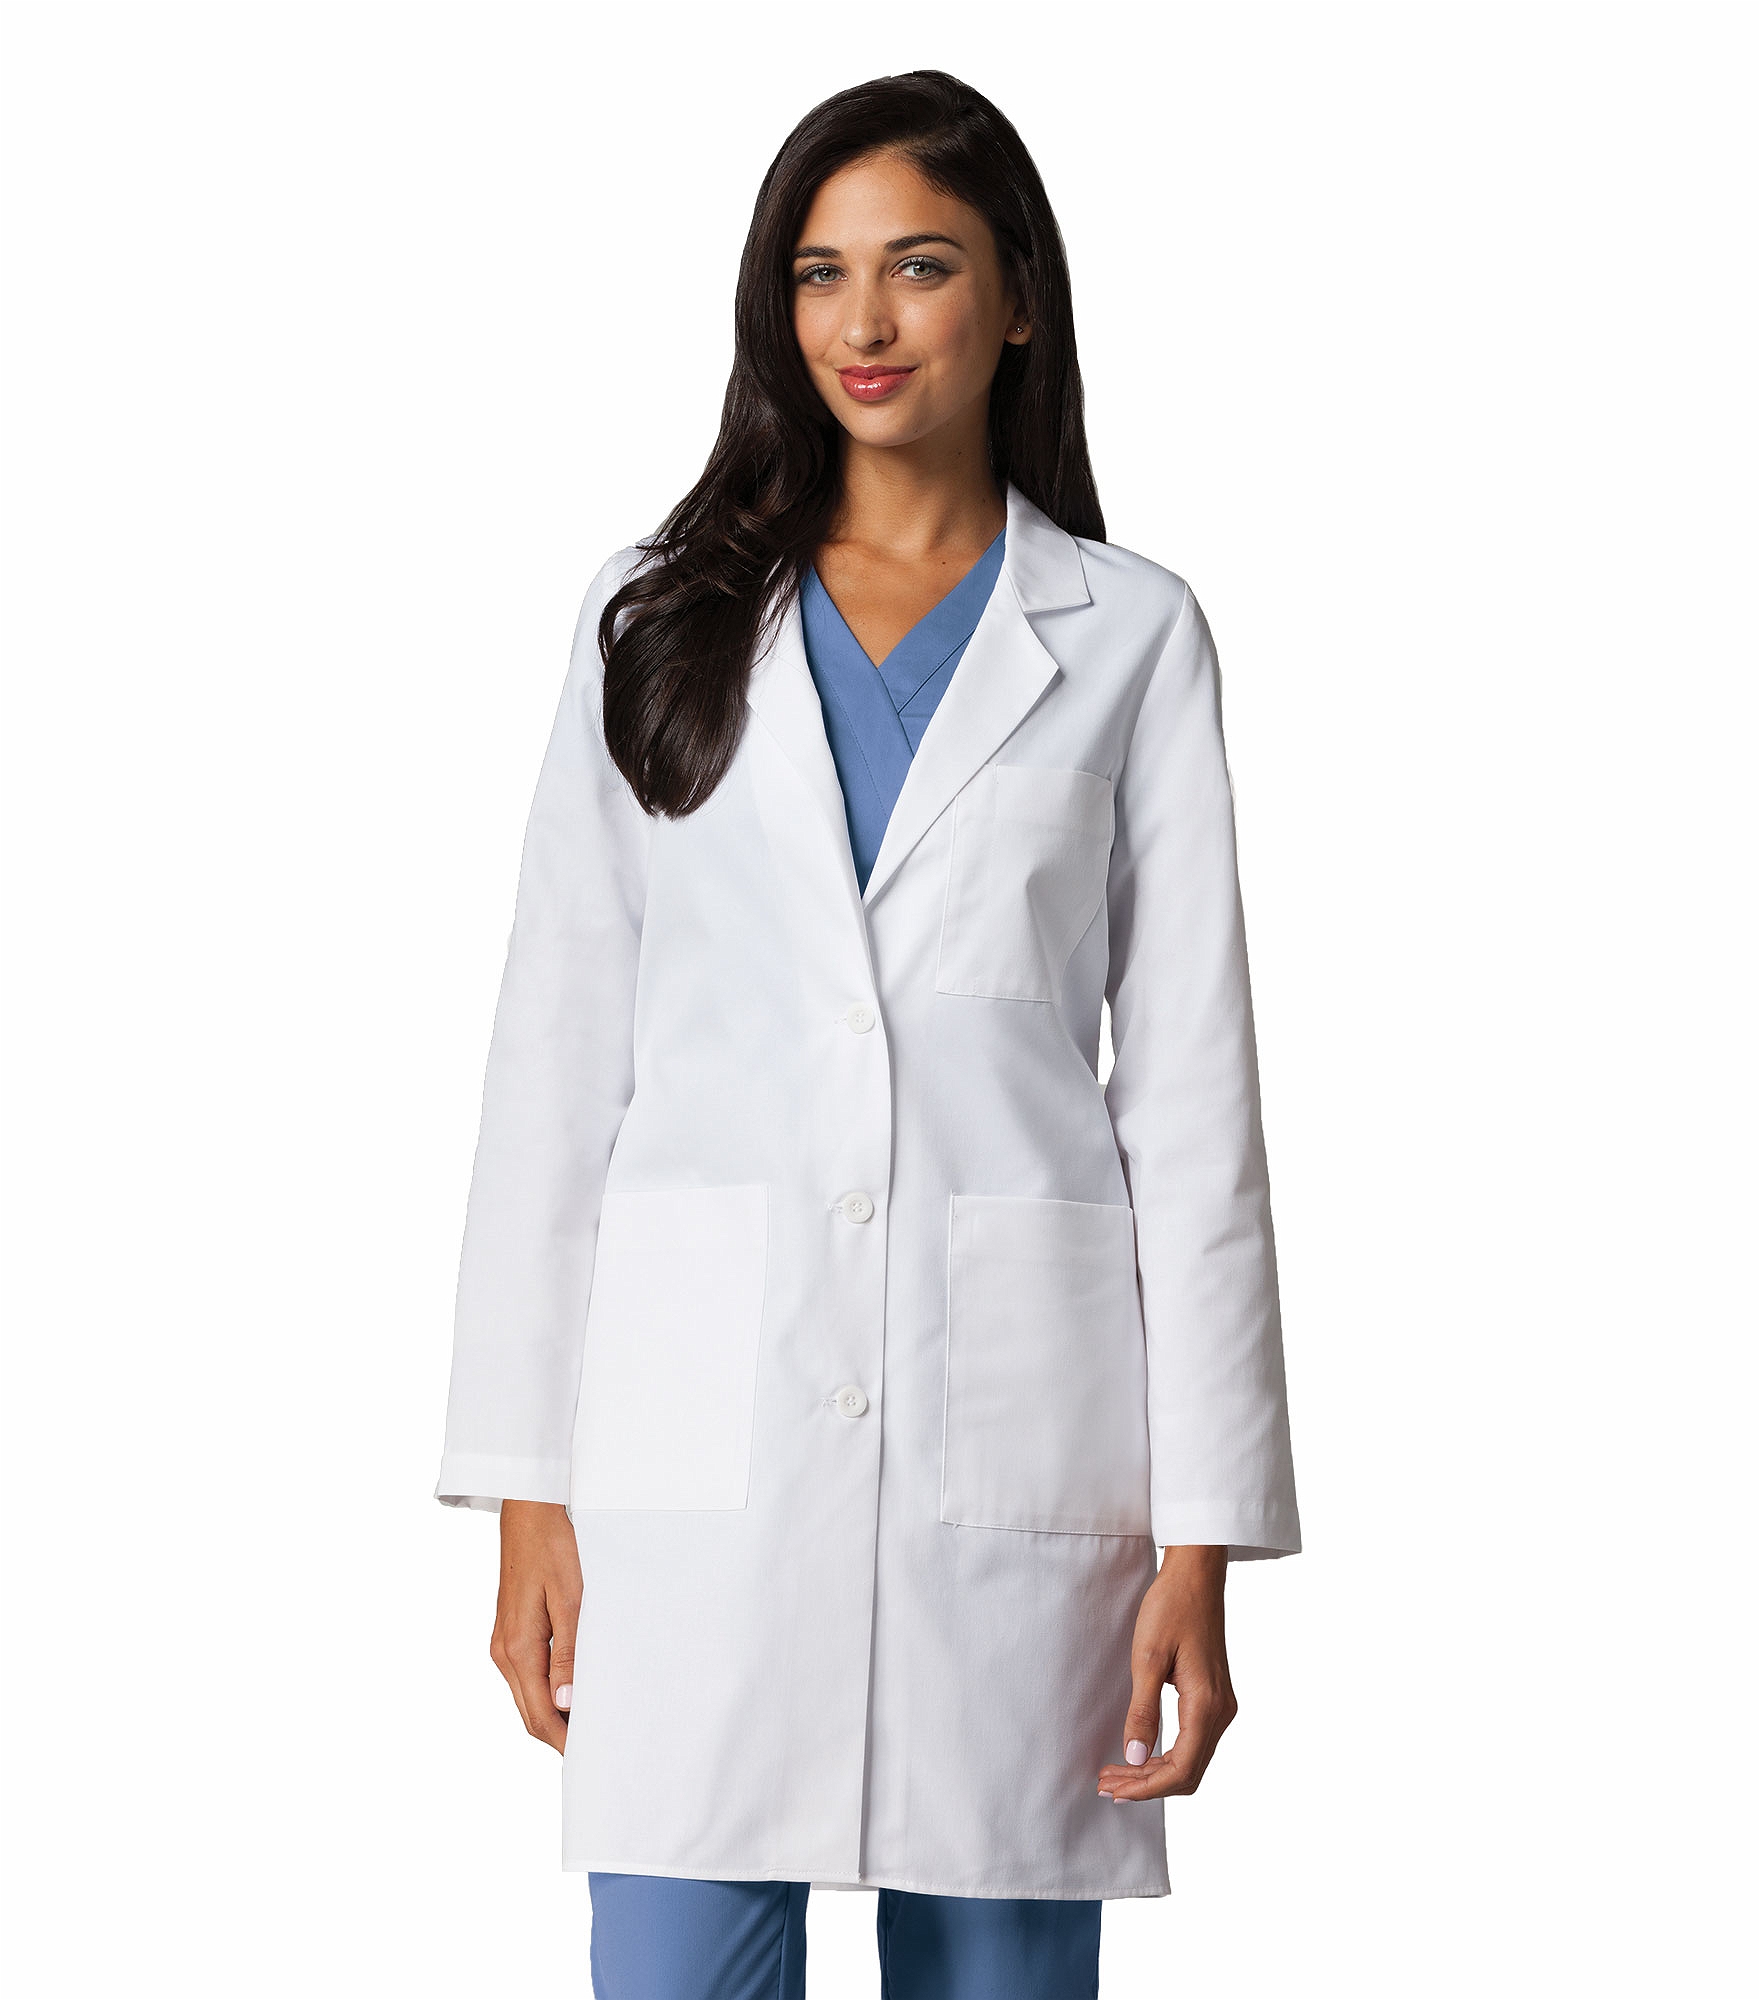 Lab Coats by Barco Women's 38" White Lab Coat-1343